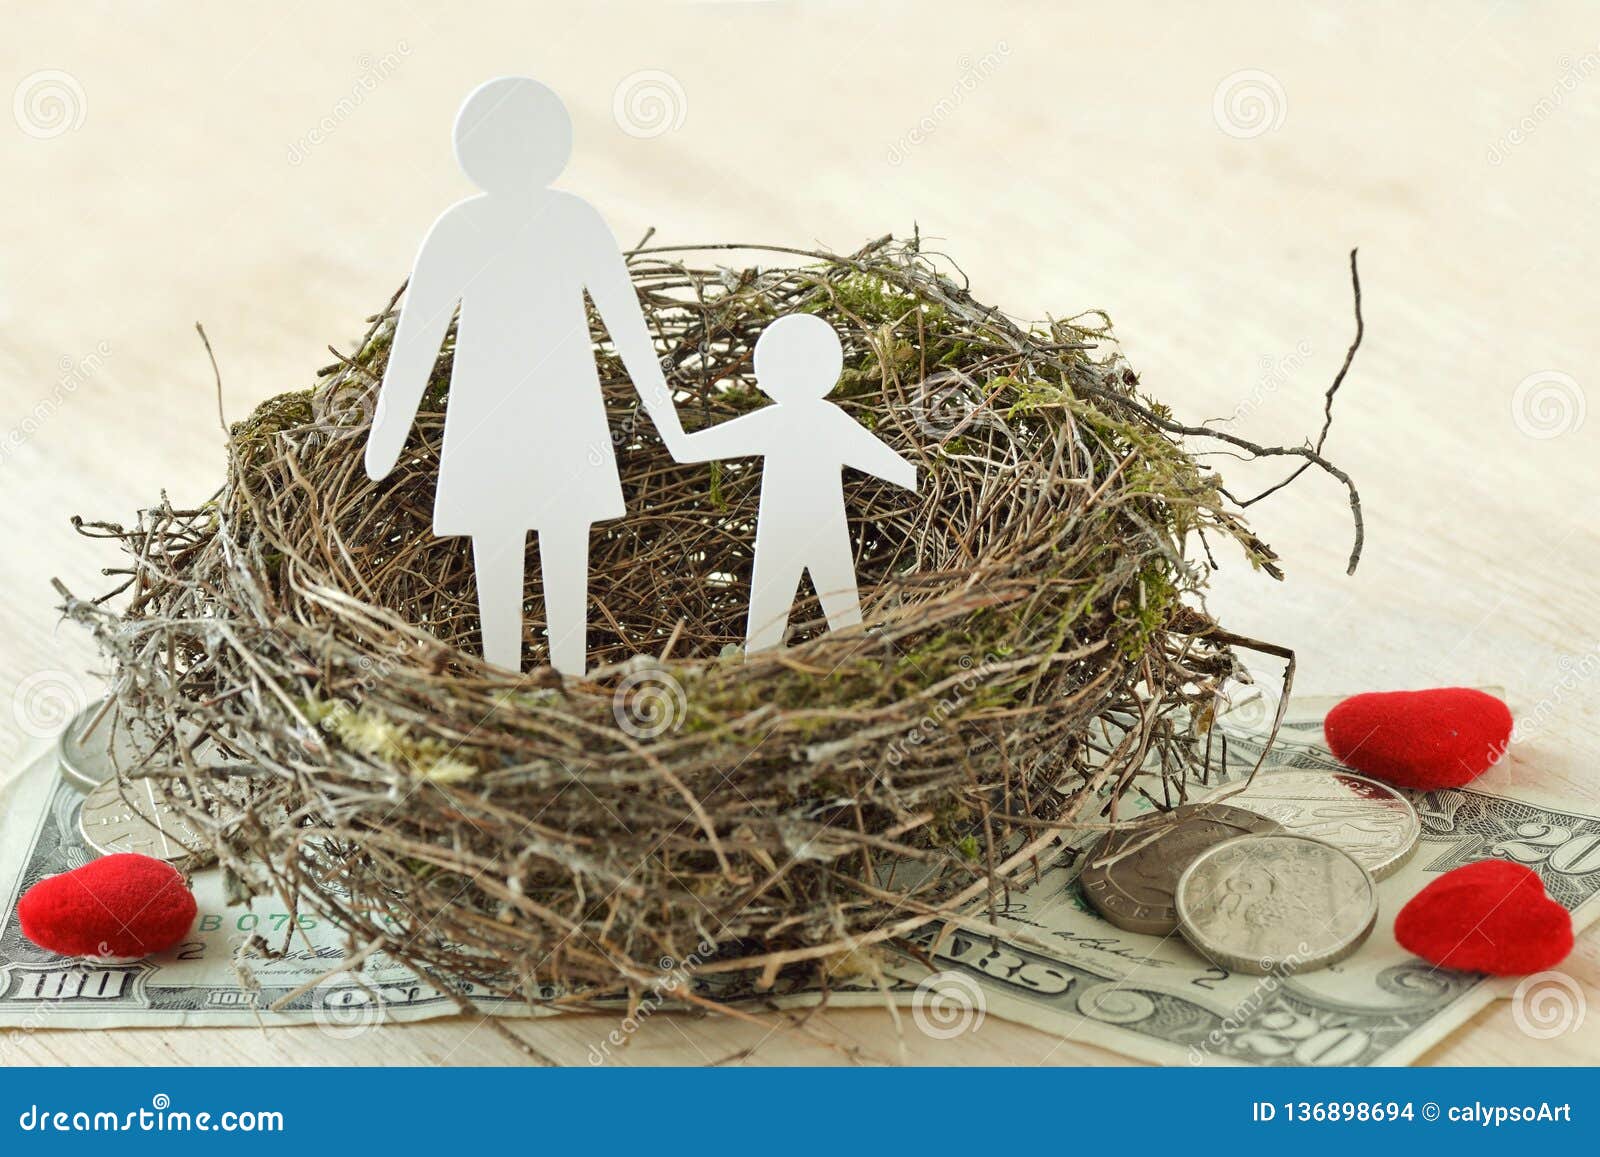 paper mother and son in nest on money and hearts - concept of single parent family